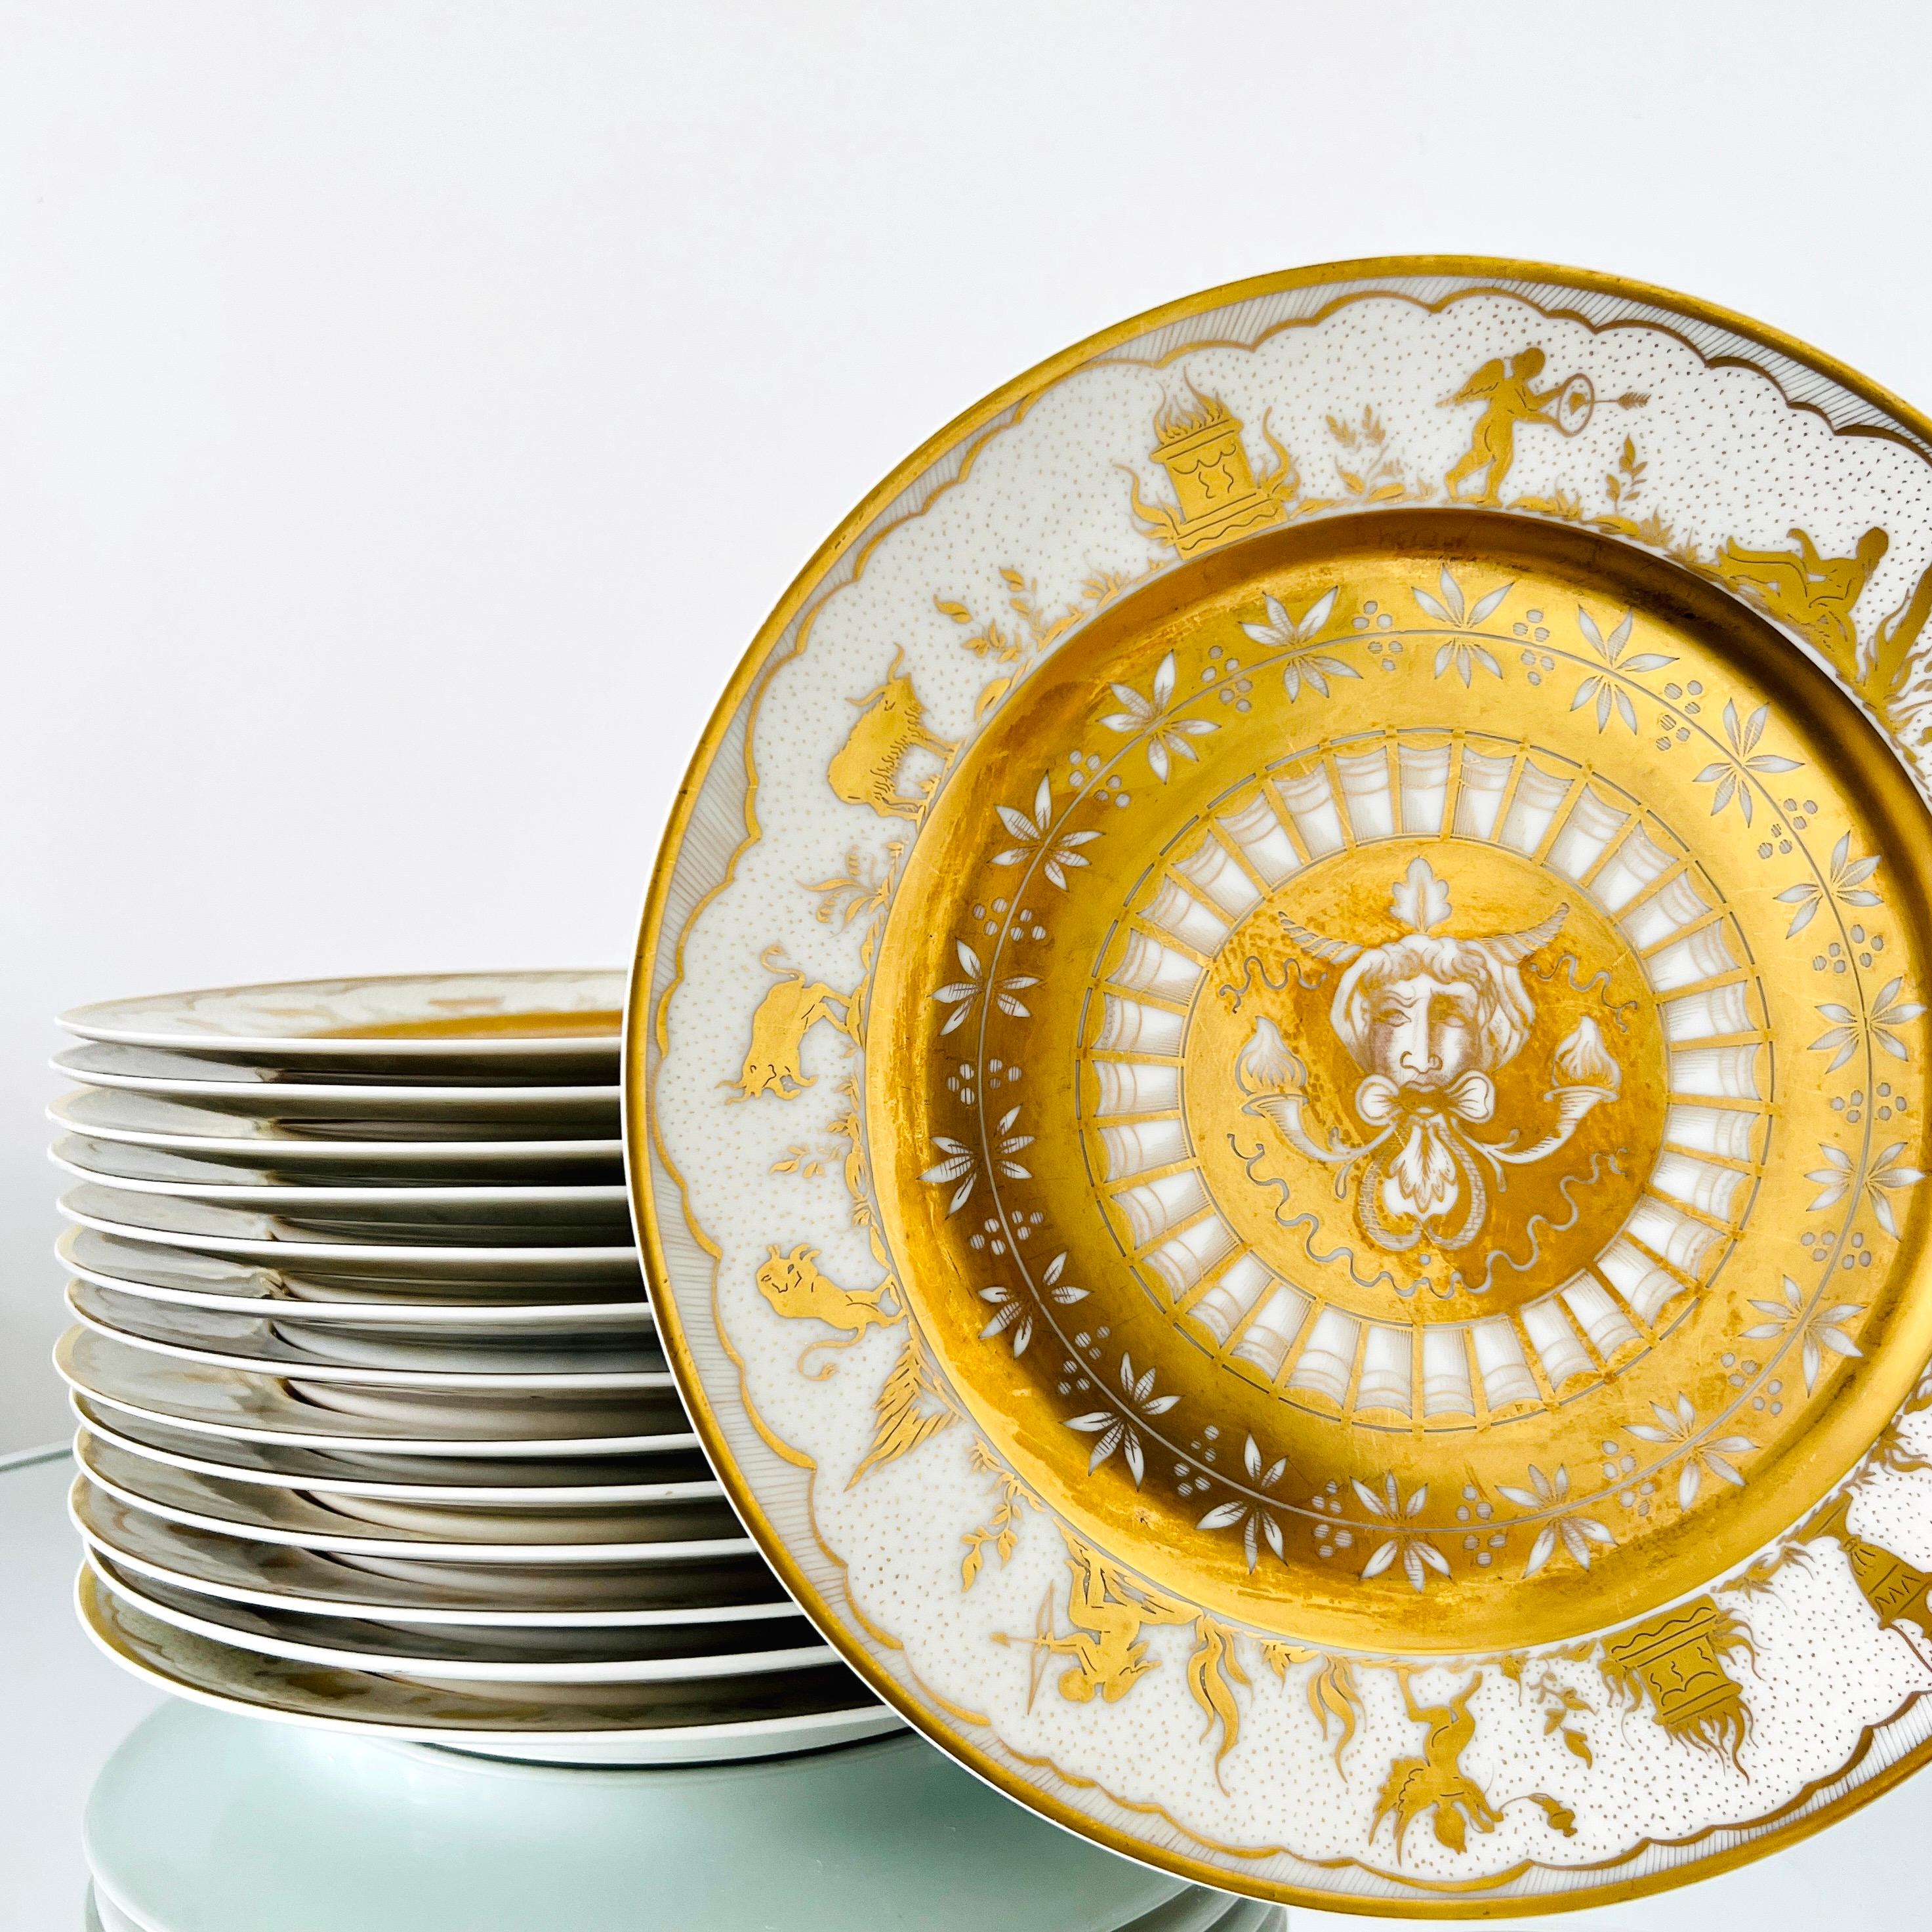 Set of fourteen Le Tallec porcelain dinner plates with hand-painted designs in 24K Gold Leaf from the late 1950's. The exquisite set features Greek Mythology and Harvest themes and is decorated with motifs of satyrs, cherubs, sheep, lions, ancients